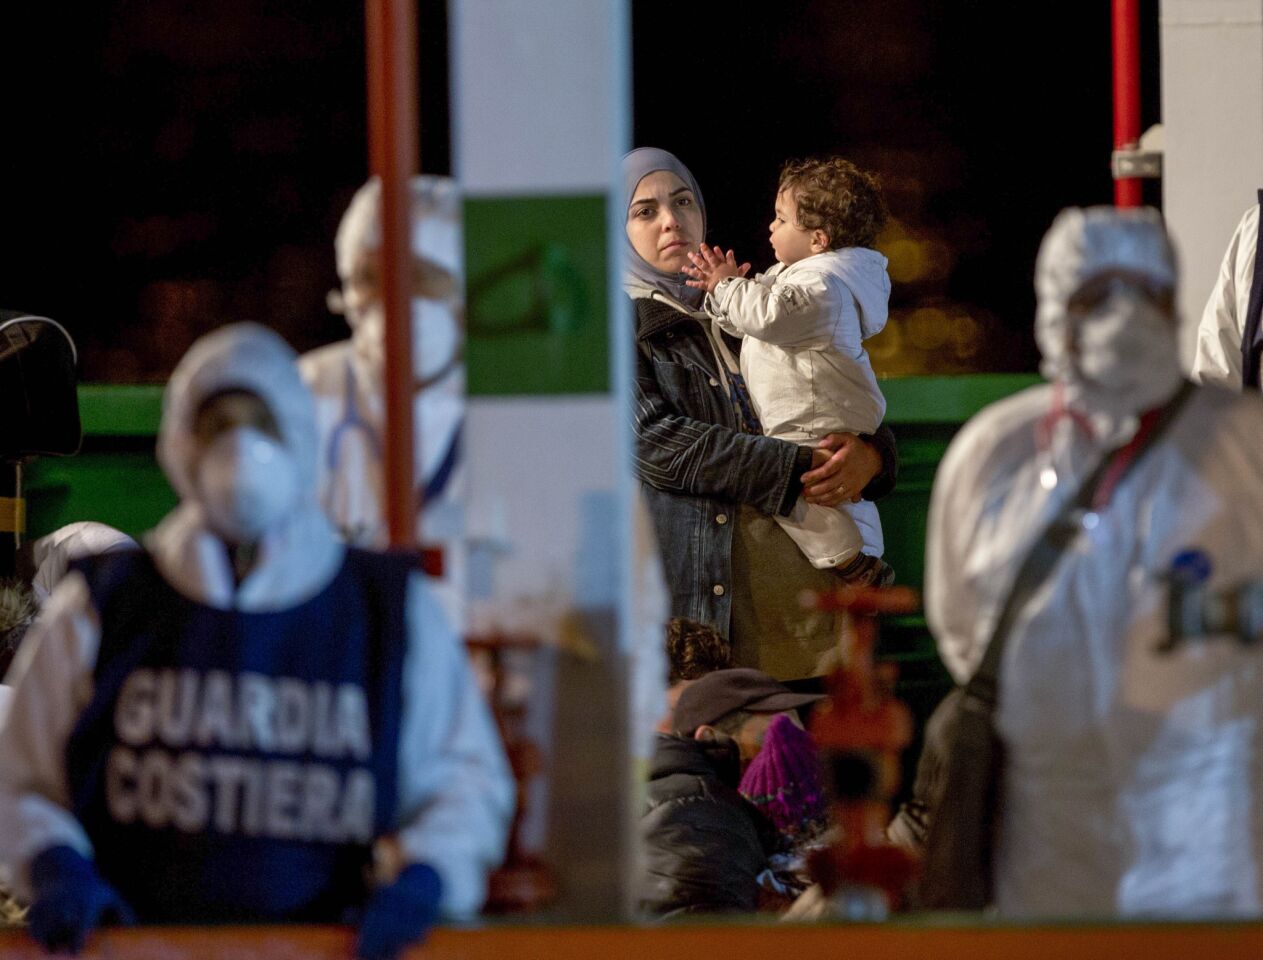 A woman carries a child as she disembarks in the Sicilian harbor of Pozzallo, Italy. About 100 migrants, including 28 children, were rescued on Sunday by a merchant vessel in the Sicilian Strait while they were trying to cross. Another smuggler's boat crammed with hundreds of people overturned off Libya's coast on Saturday as rescuers approached.